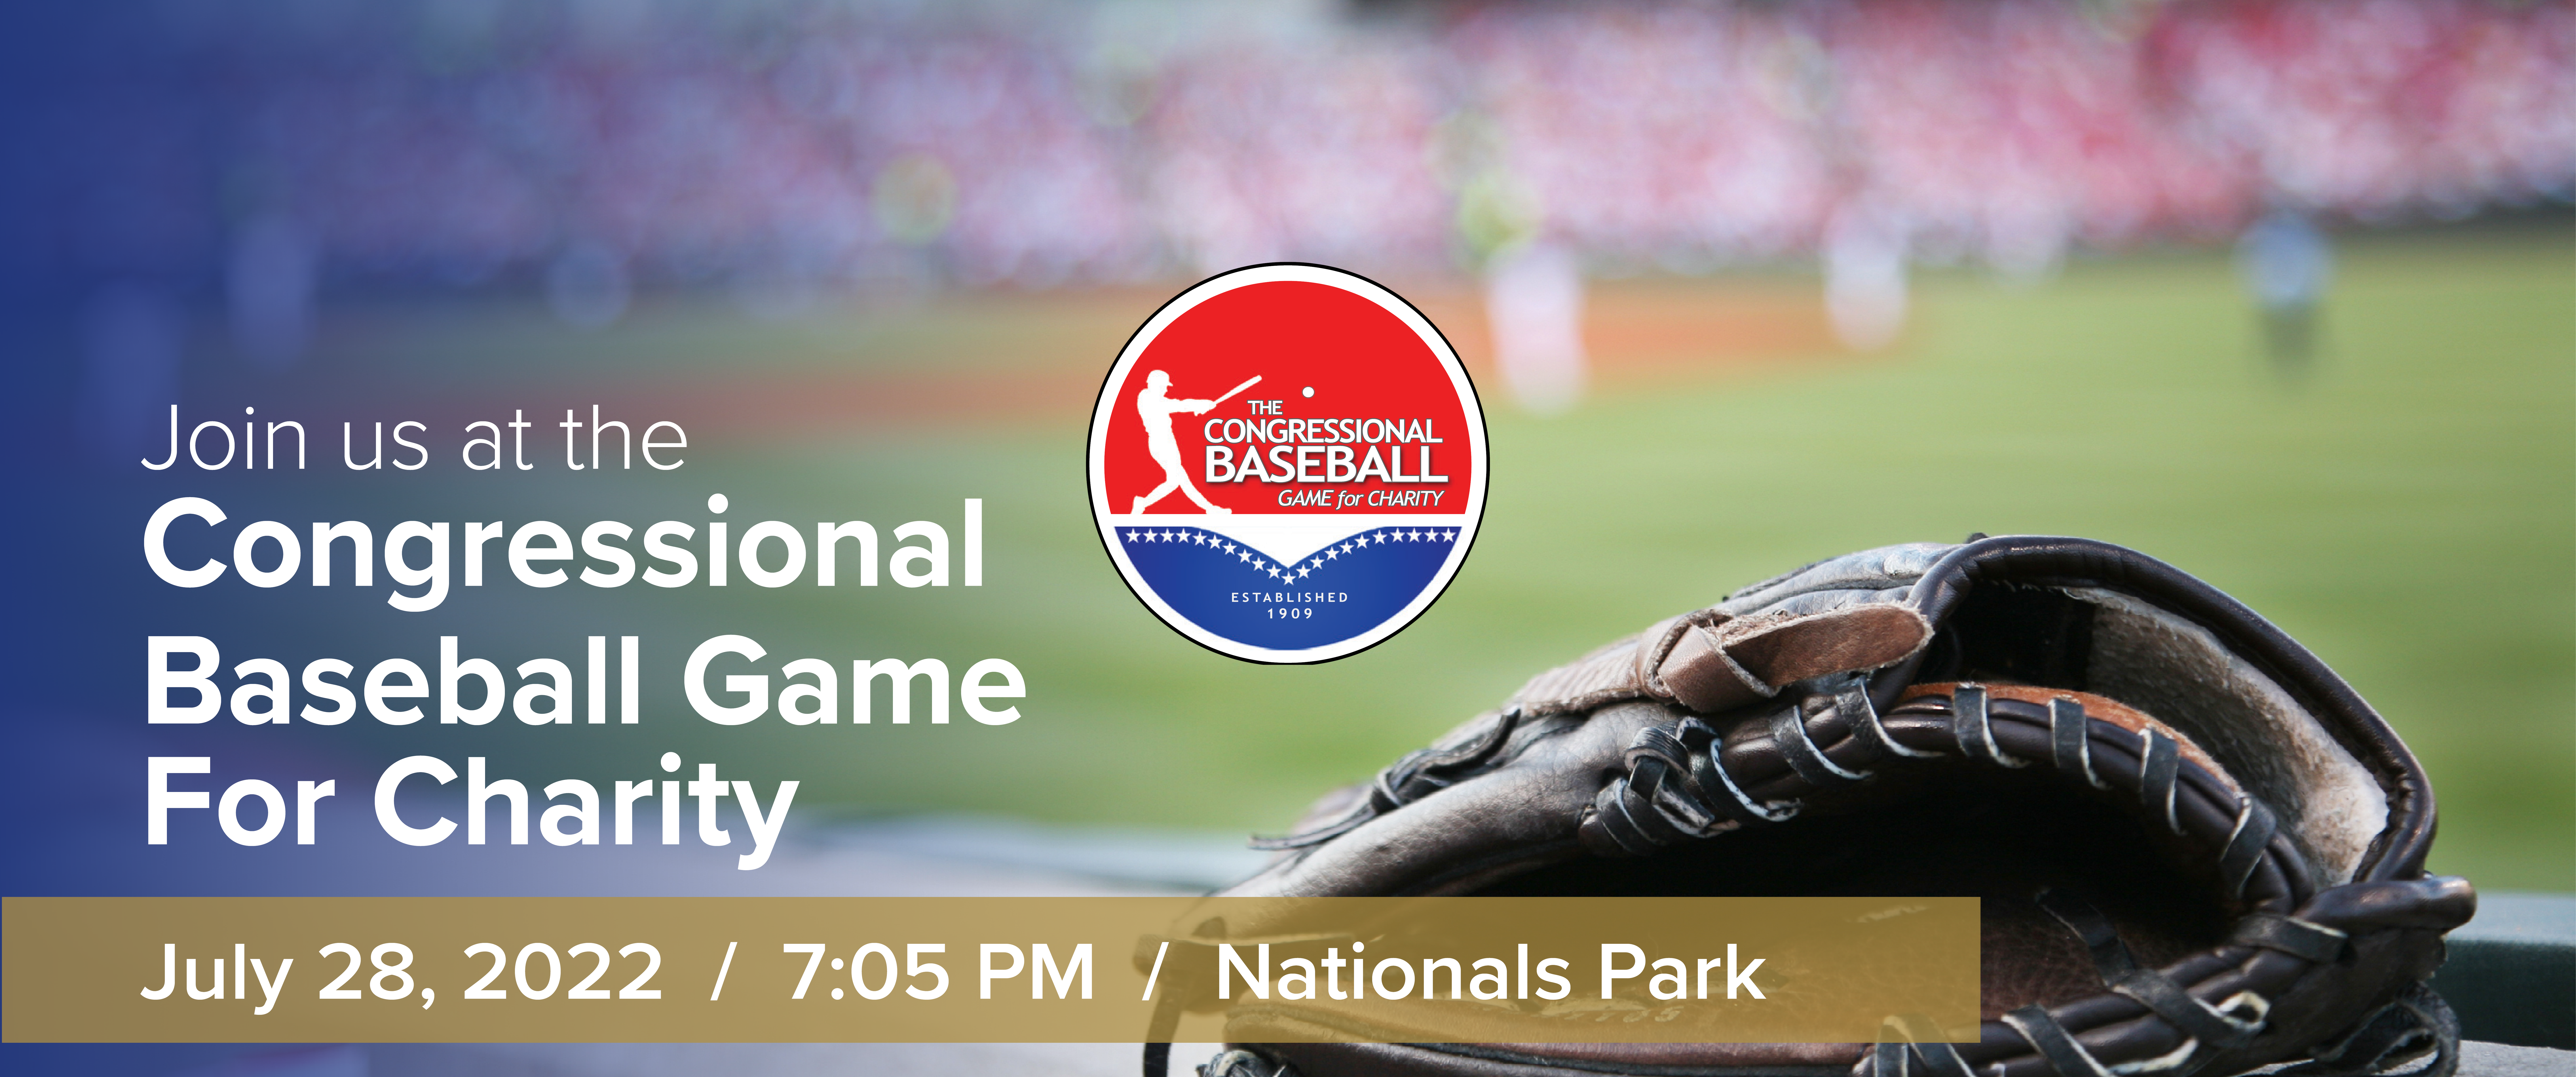 Join us at the Congressional Baseball Game for Charity July 28,2022 7:05pm Nationals Park